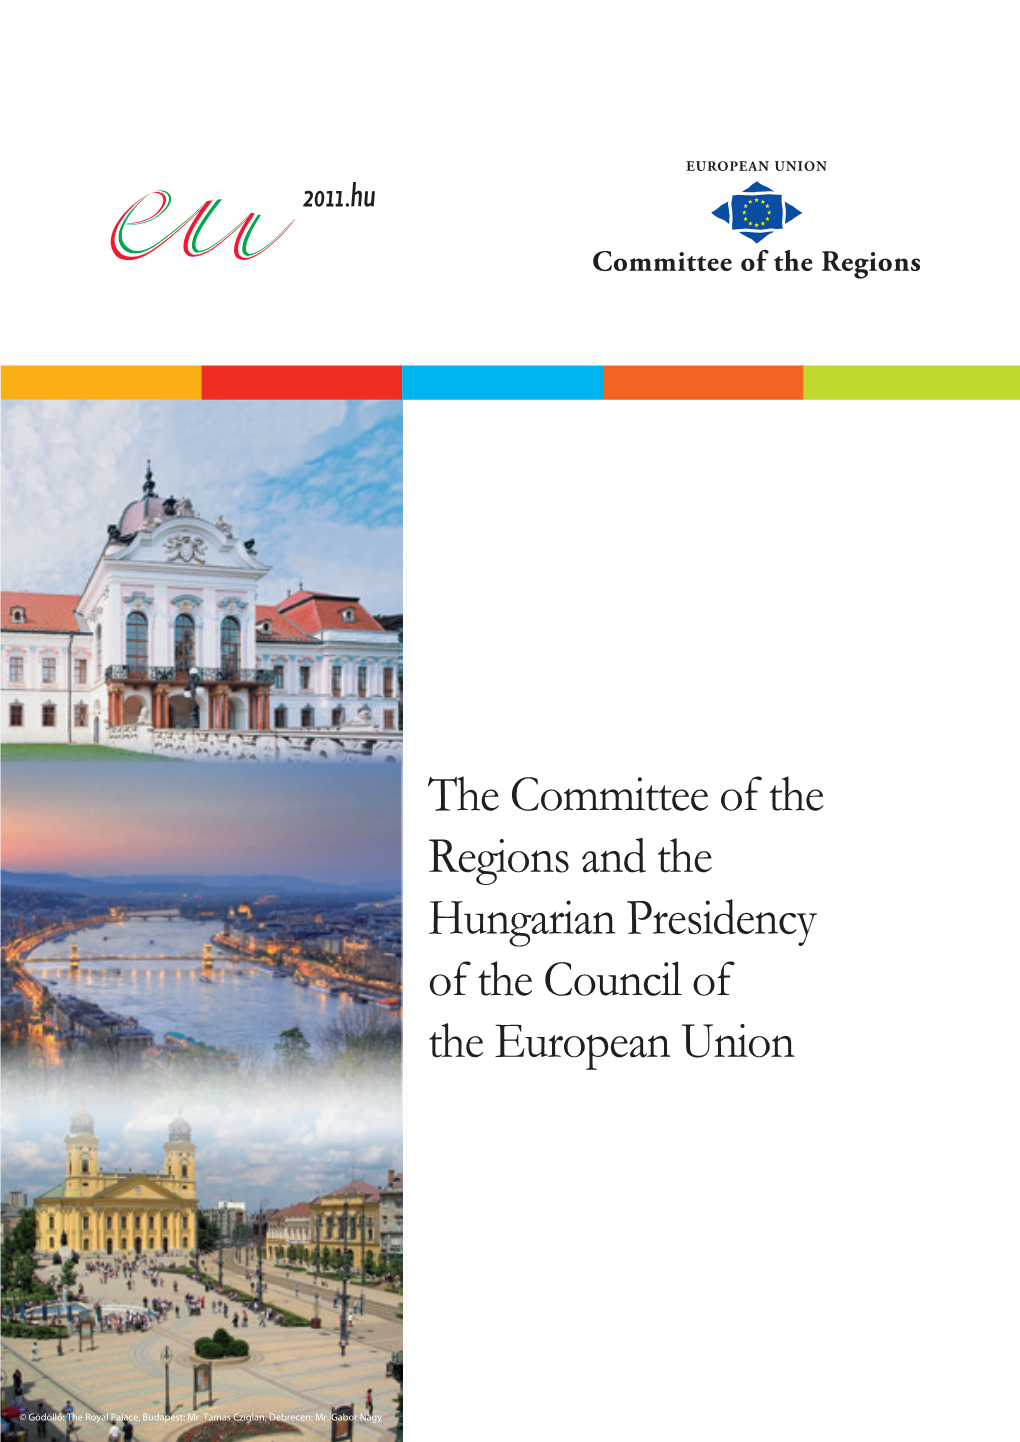 The Committee of the Regions and the Hungarian Presidency of the Council of the European Union